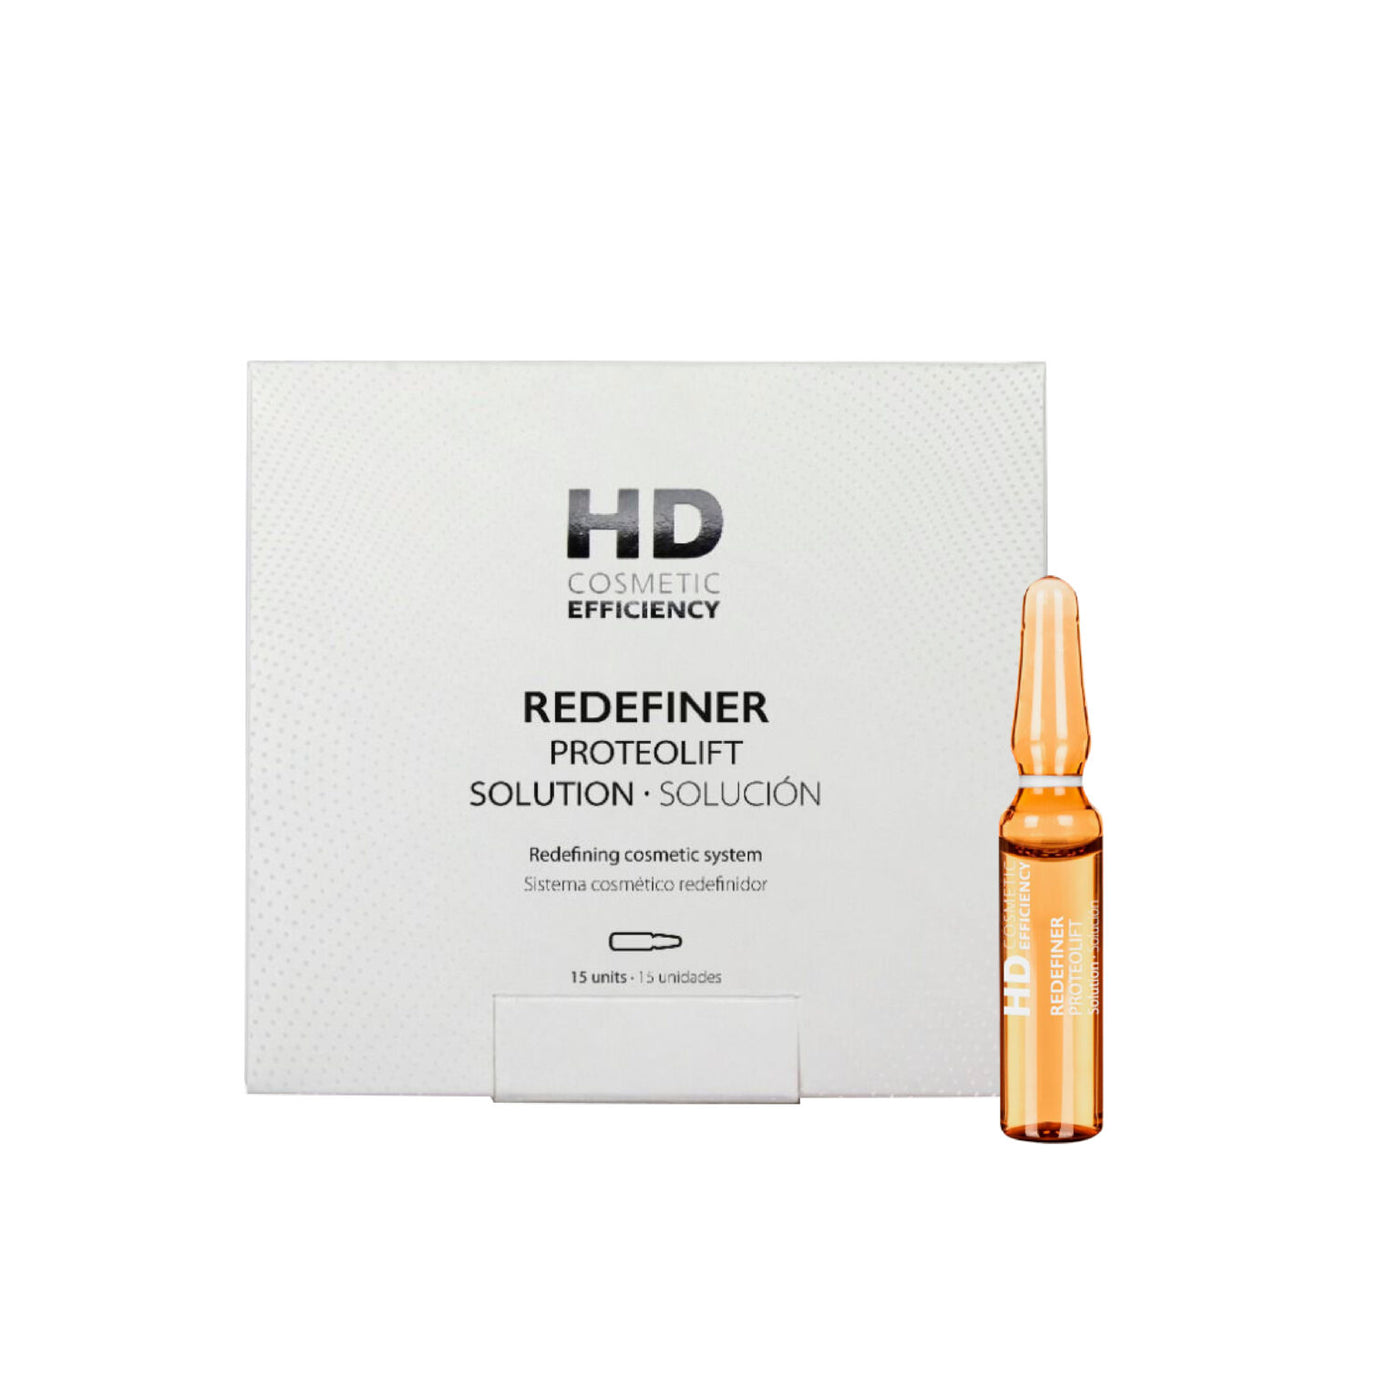 HD COSMETIC REDEFINER PROTEOLIFT 15 AMP X 2 ML | The Glow Shop